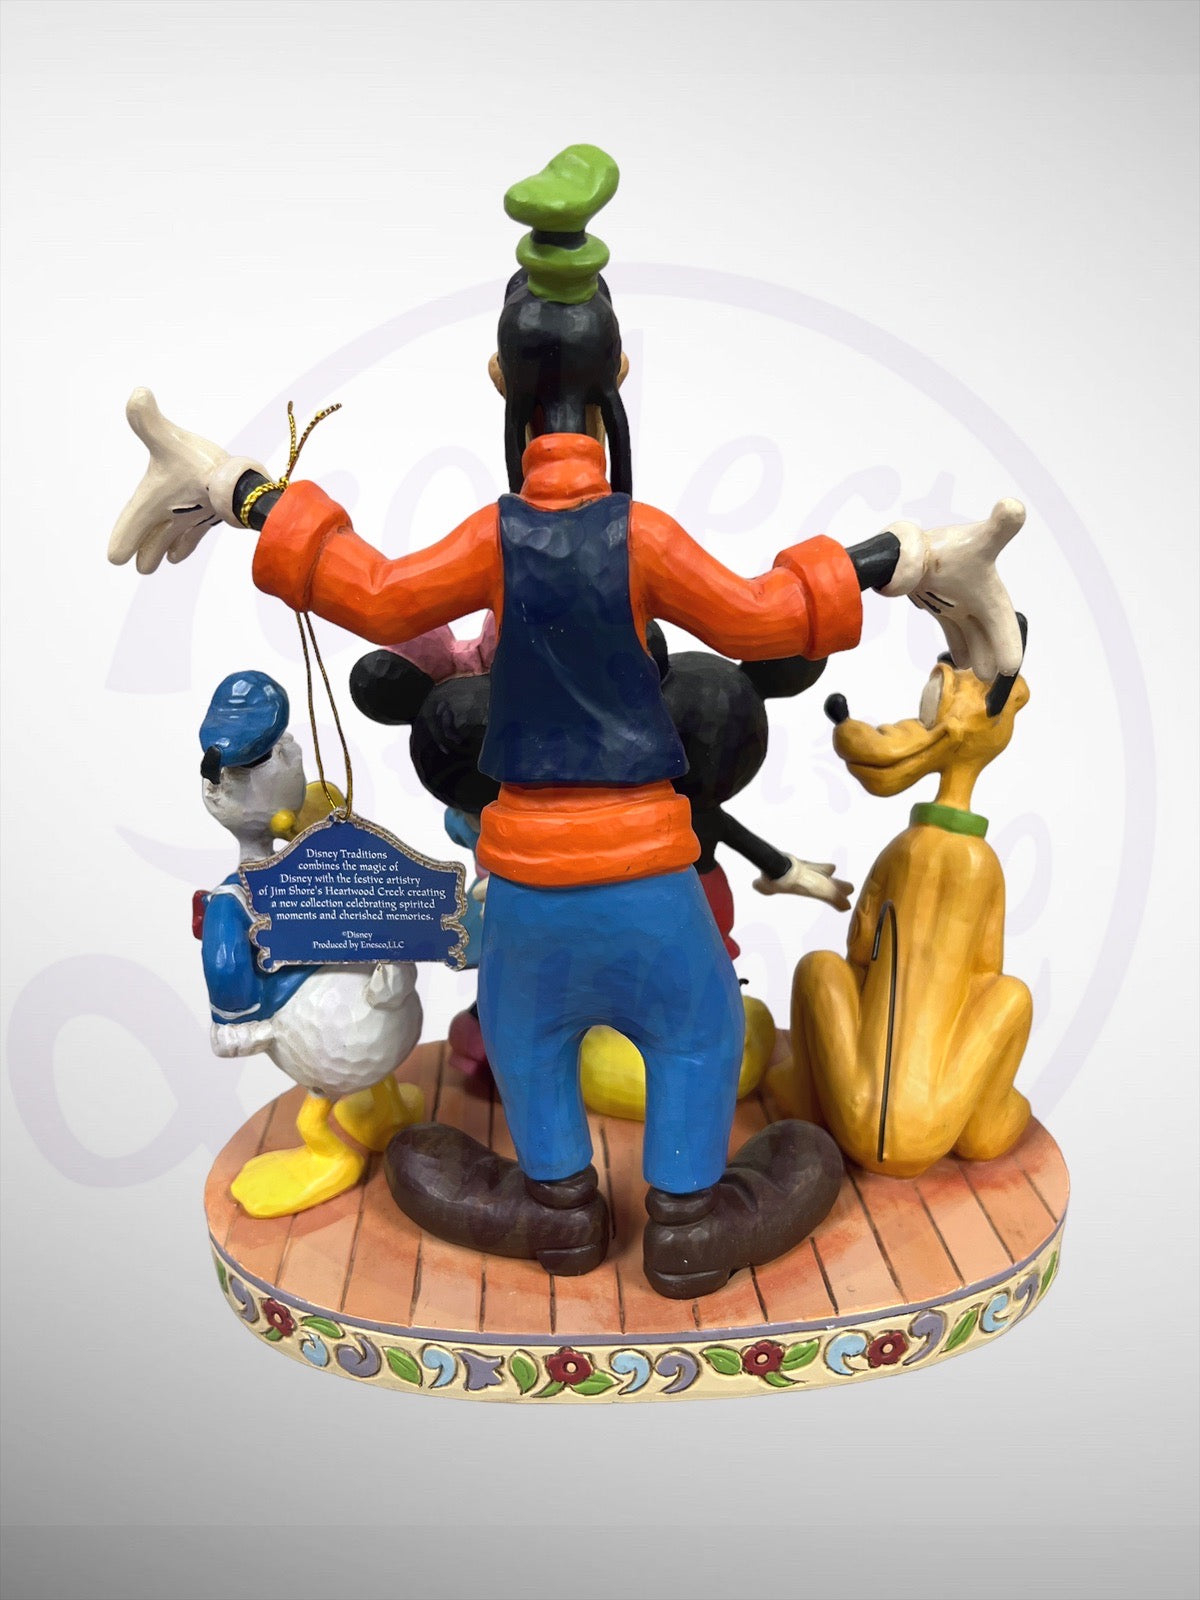 Jim Shore Disney Traditions - The Gang's All Here Mickey Minnie Donald Goofy Pluto Figurine